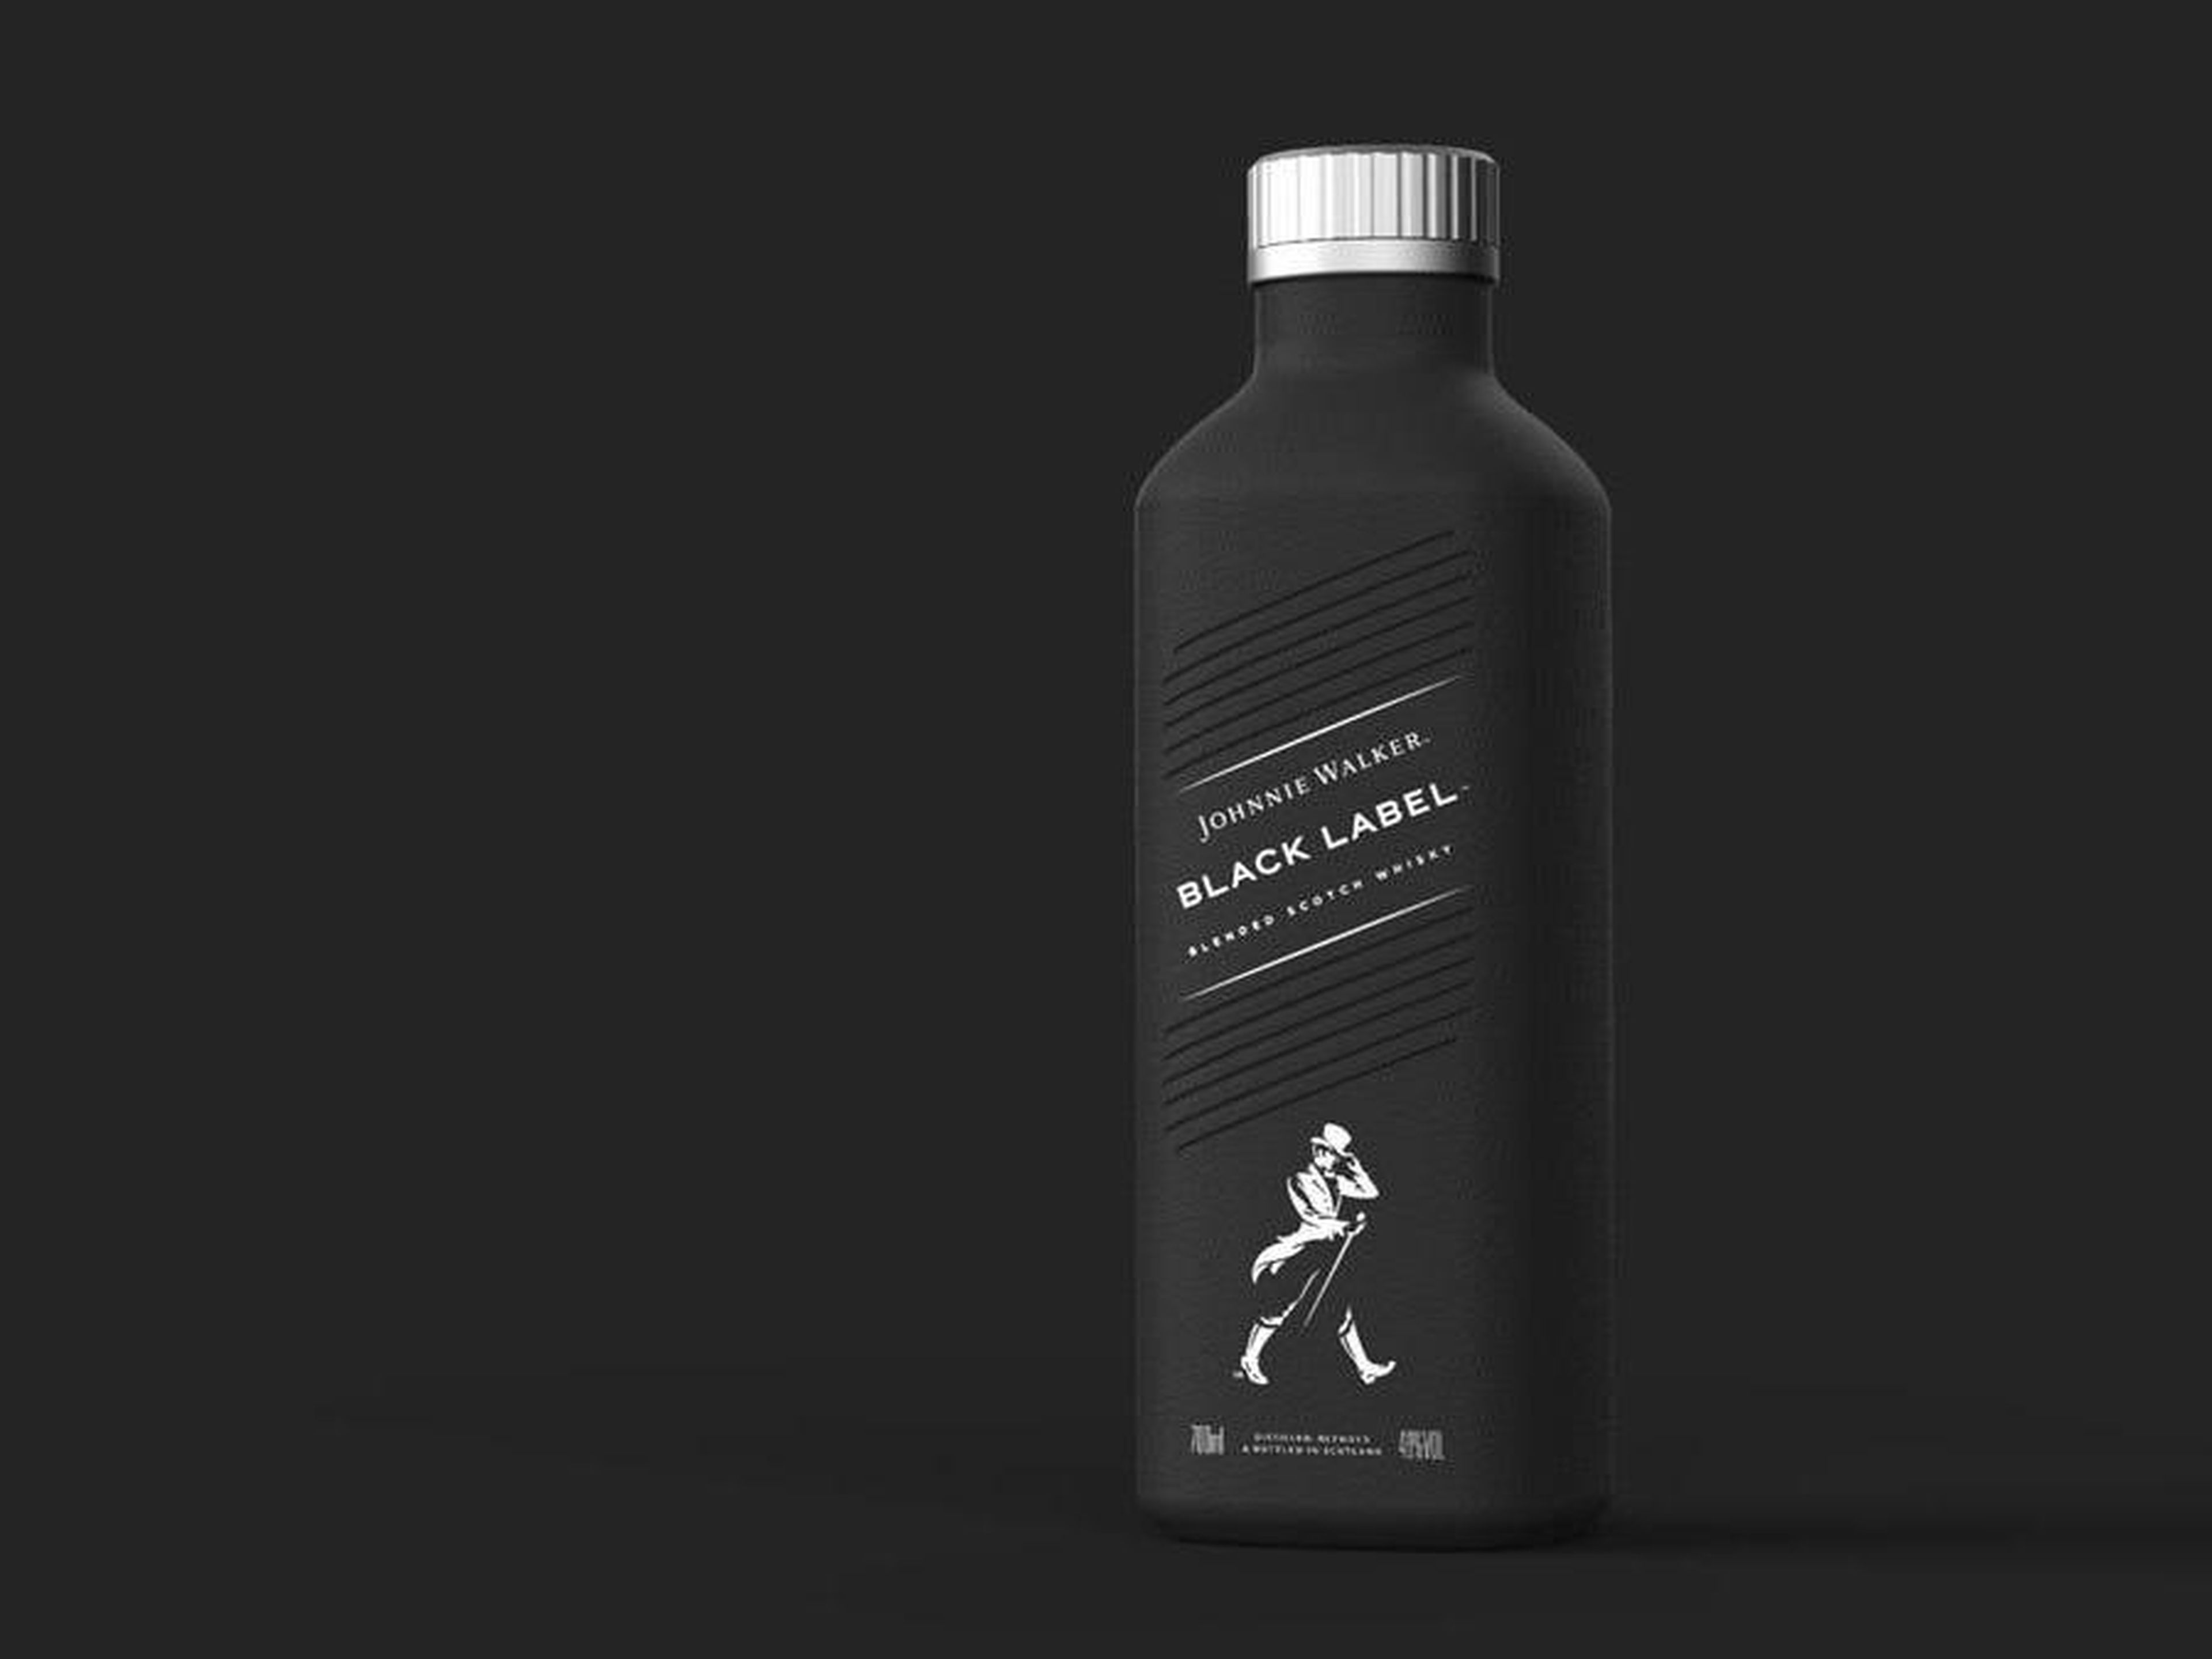 Johnnie Walker is launching a new bottle that's made out of paper